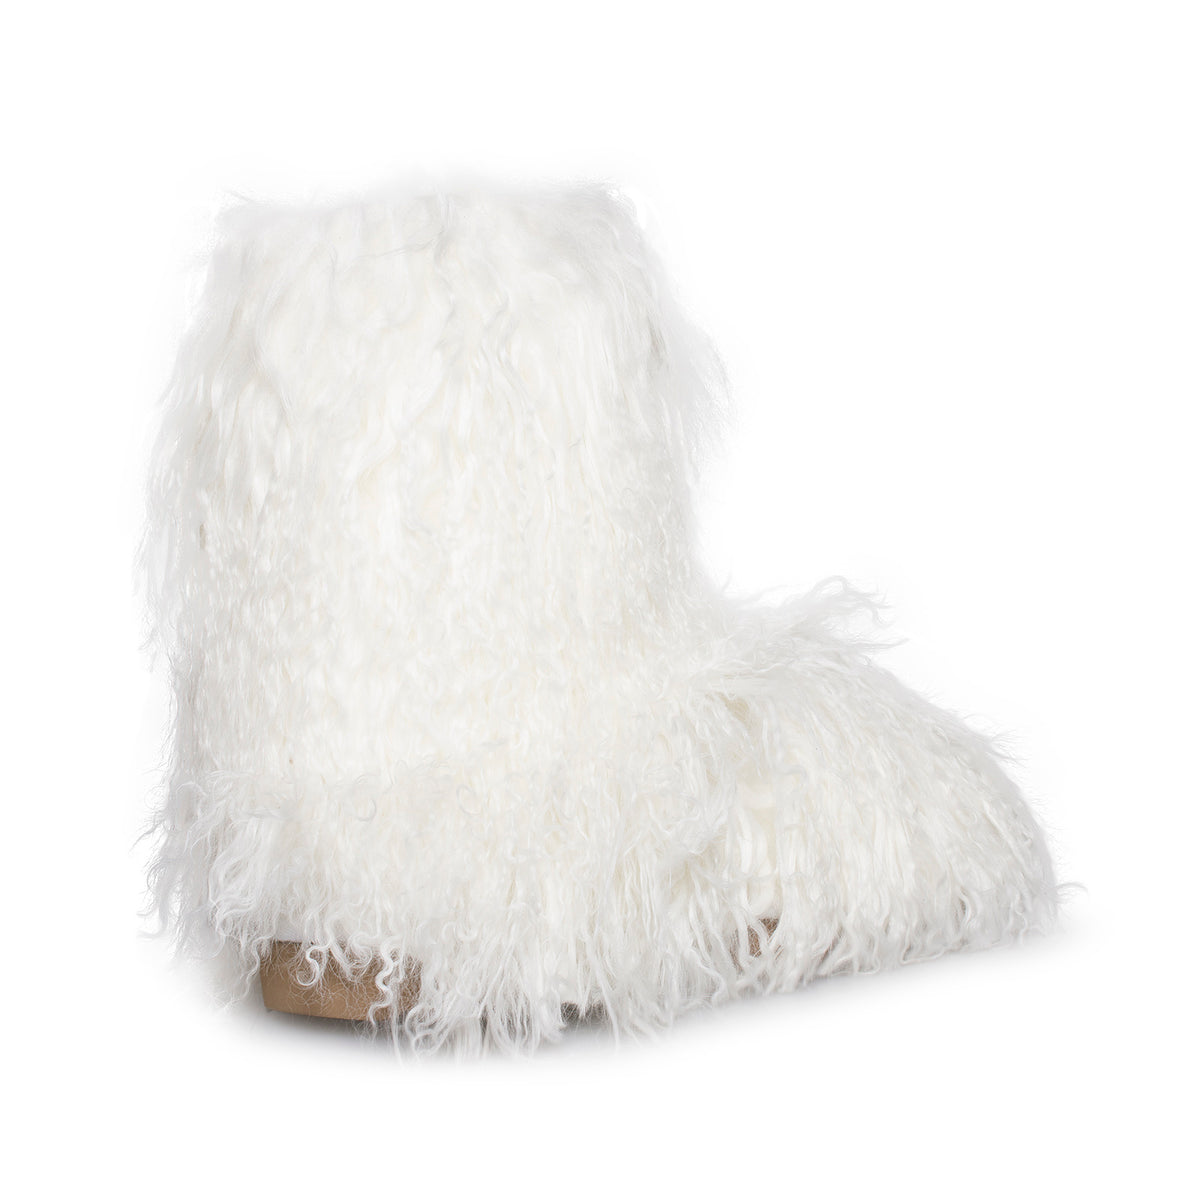 uggs fluff momma boots